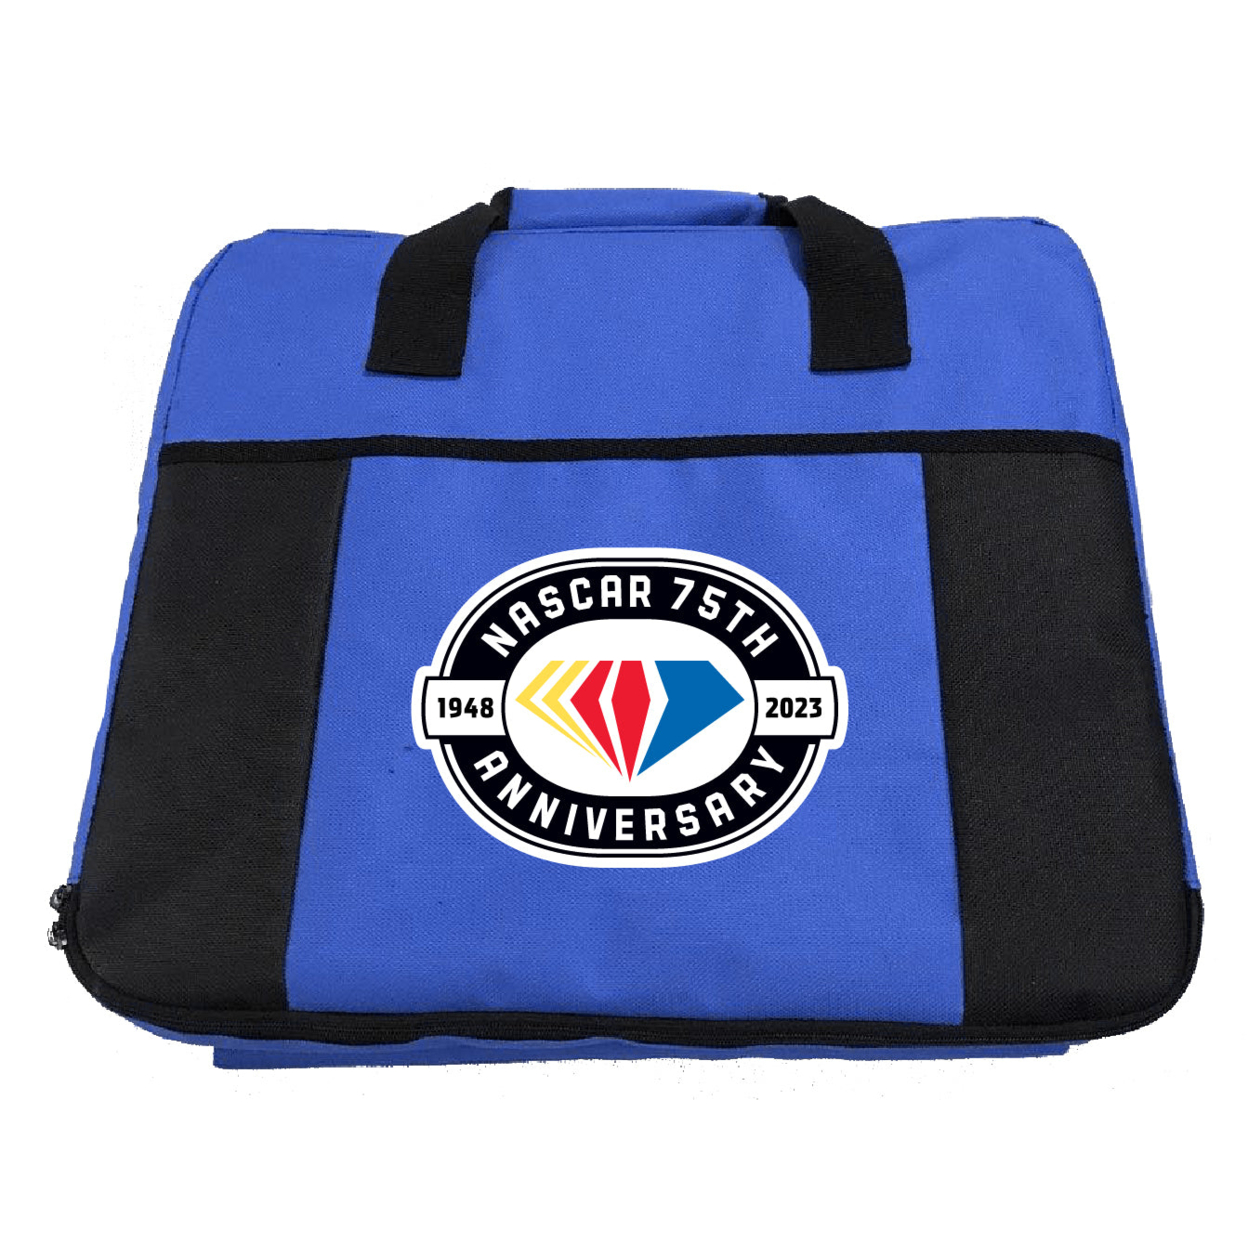 NASCAR 75 Year Anniversary Officially Licensed Deluxe Seat Cushion - Blue